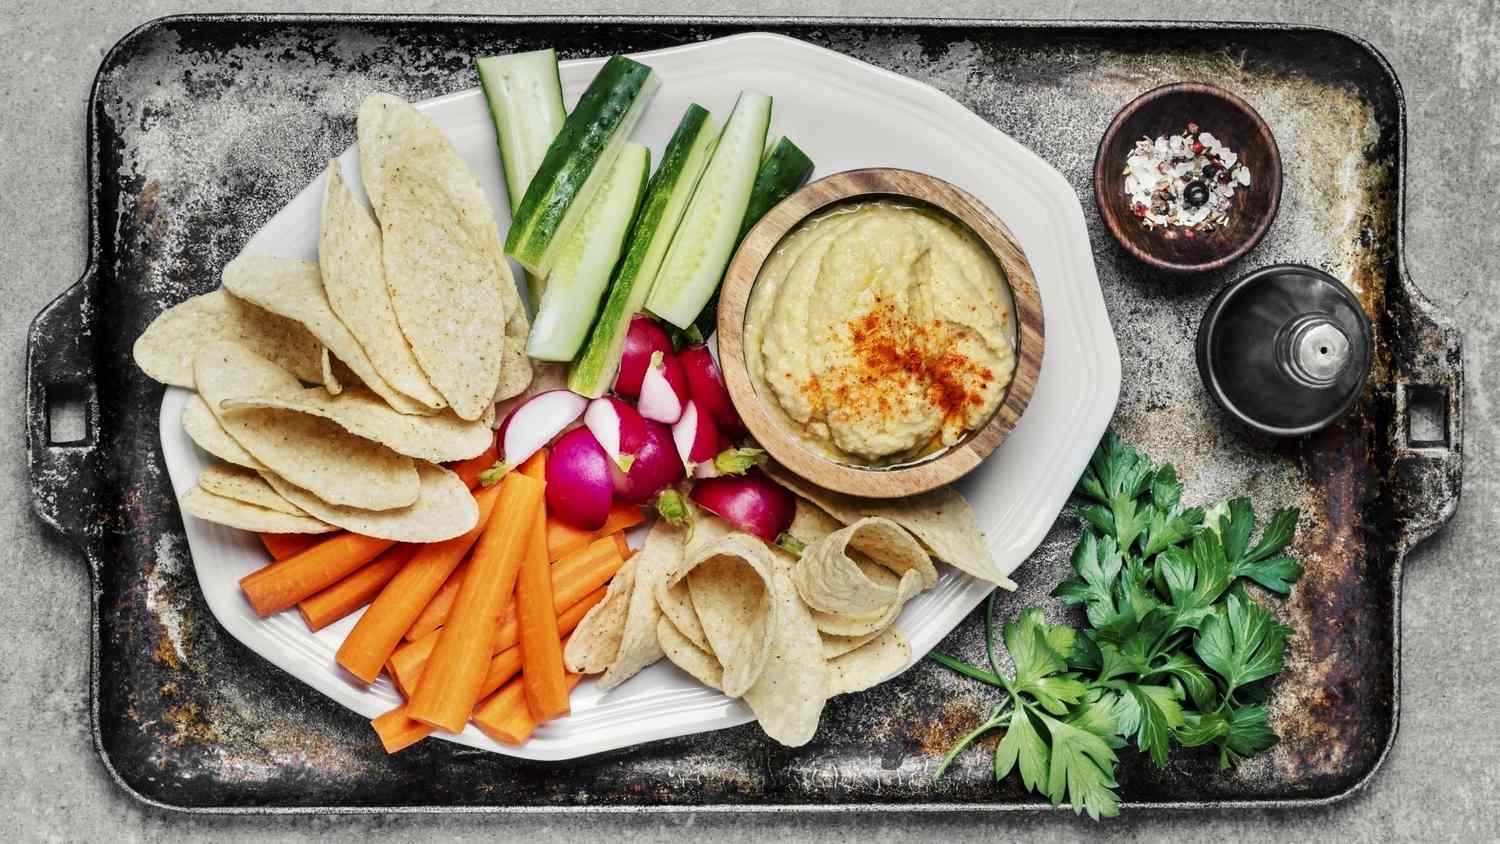 best-store-bought-meal-shortcuts: hummus and vegetables